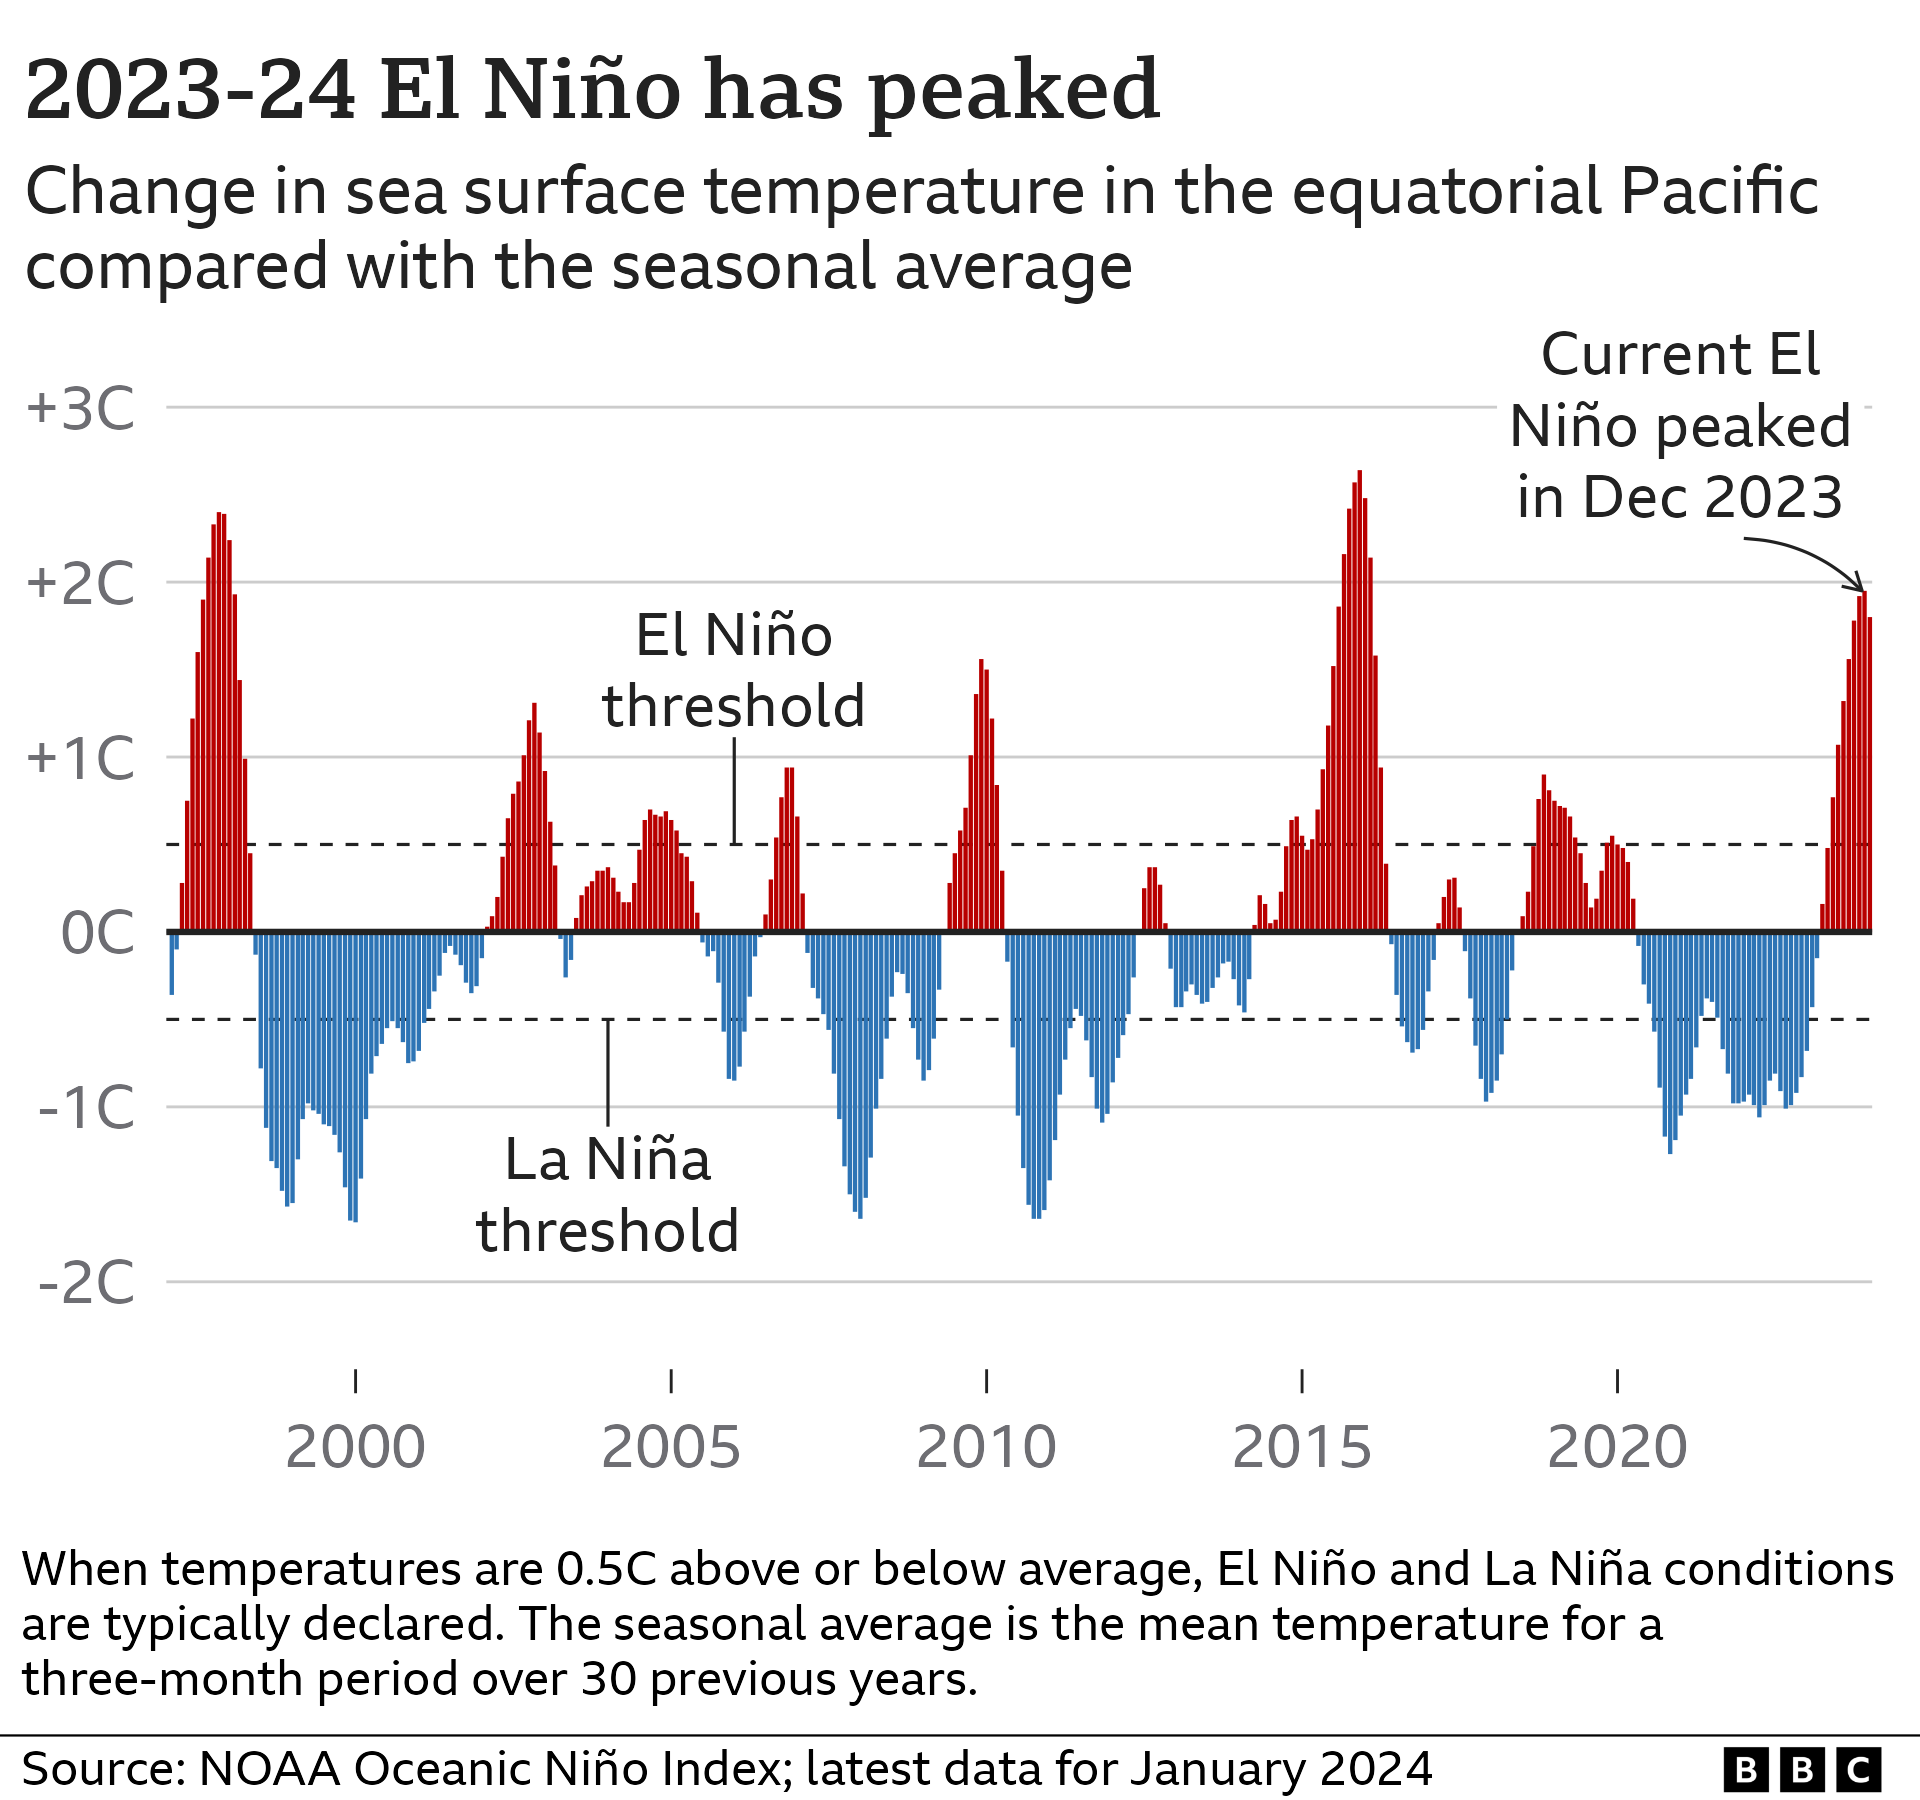 Chart showing average seasonal sea surface temperatures in the equatorial Pacific compared with the long-term average. When temperatures are 0.5C above or below the average, they are considered to be El Niño or La Niña conditions respectively. Recent months have shown El Niño conditions, but these now appear to have peaked.